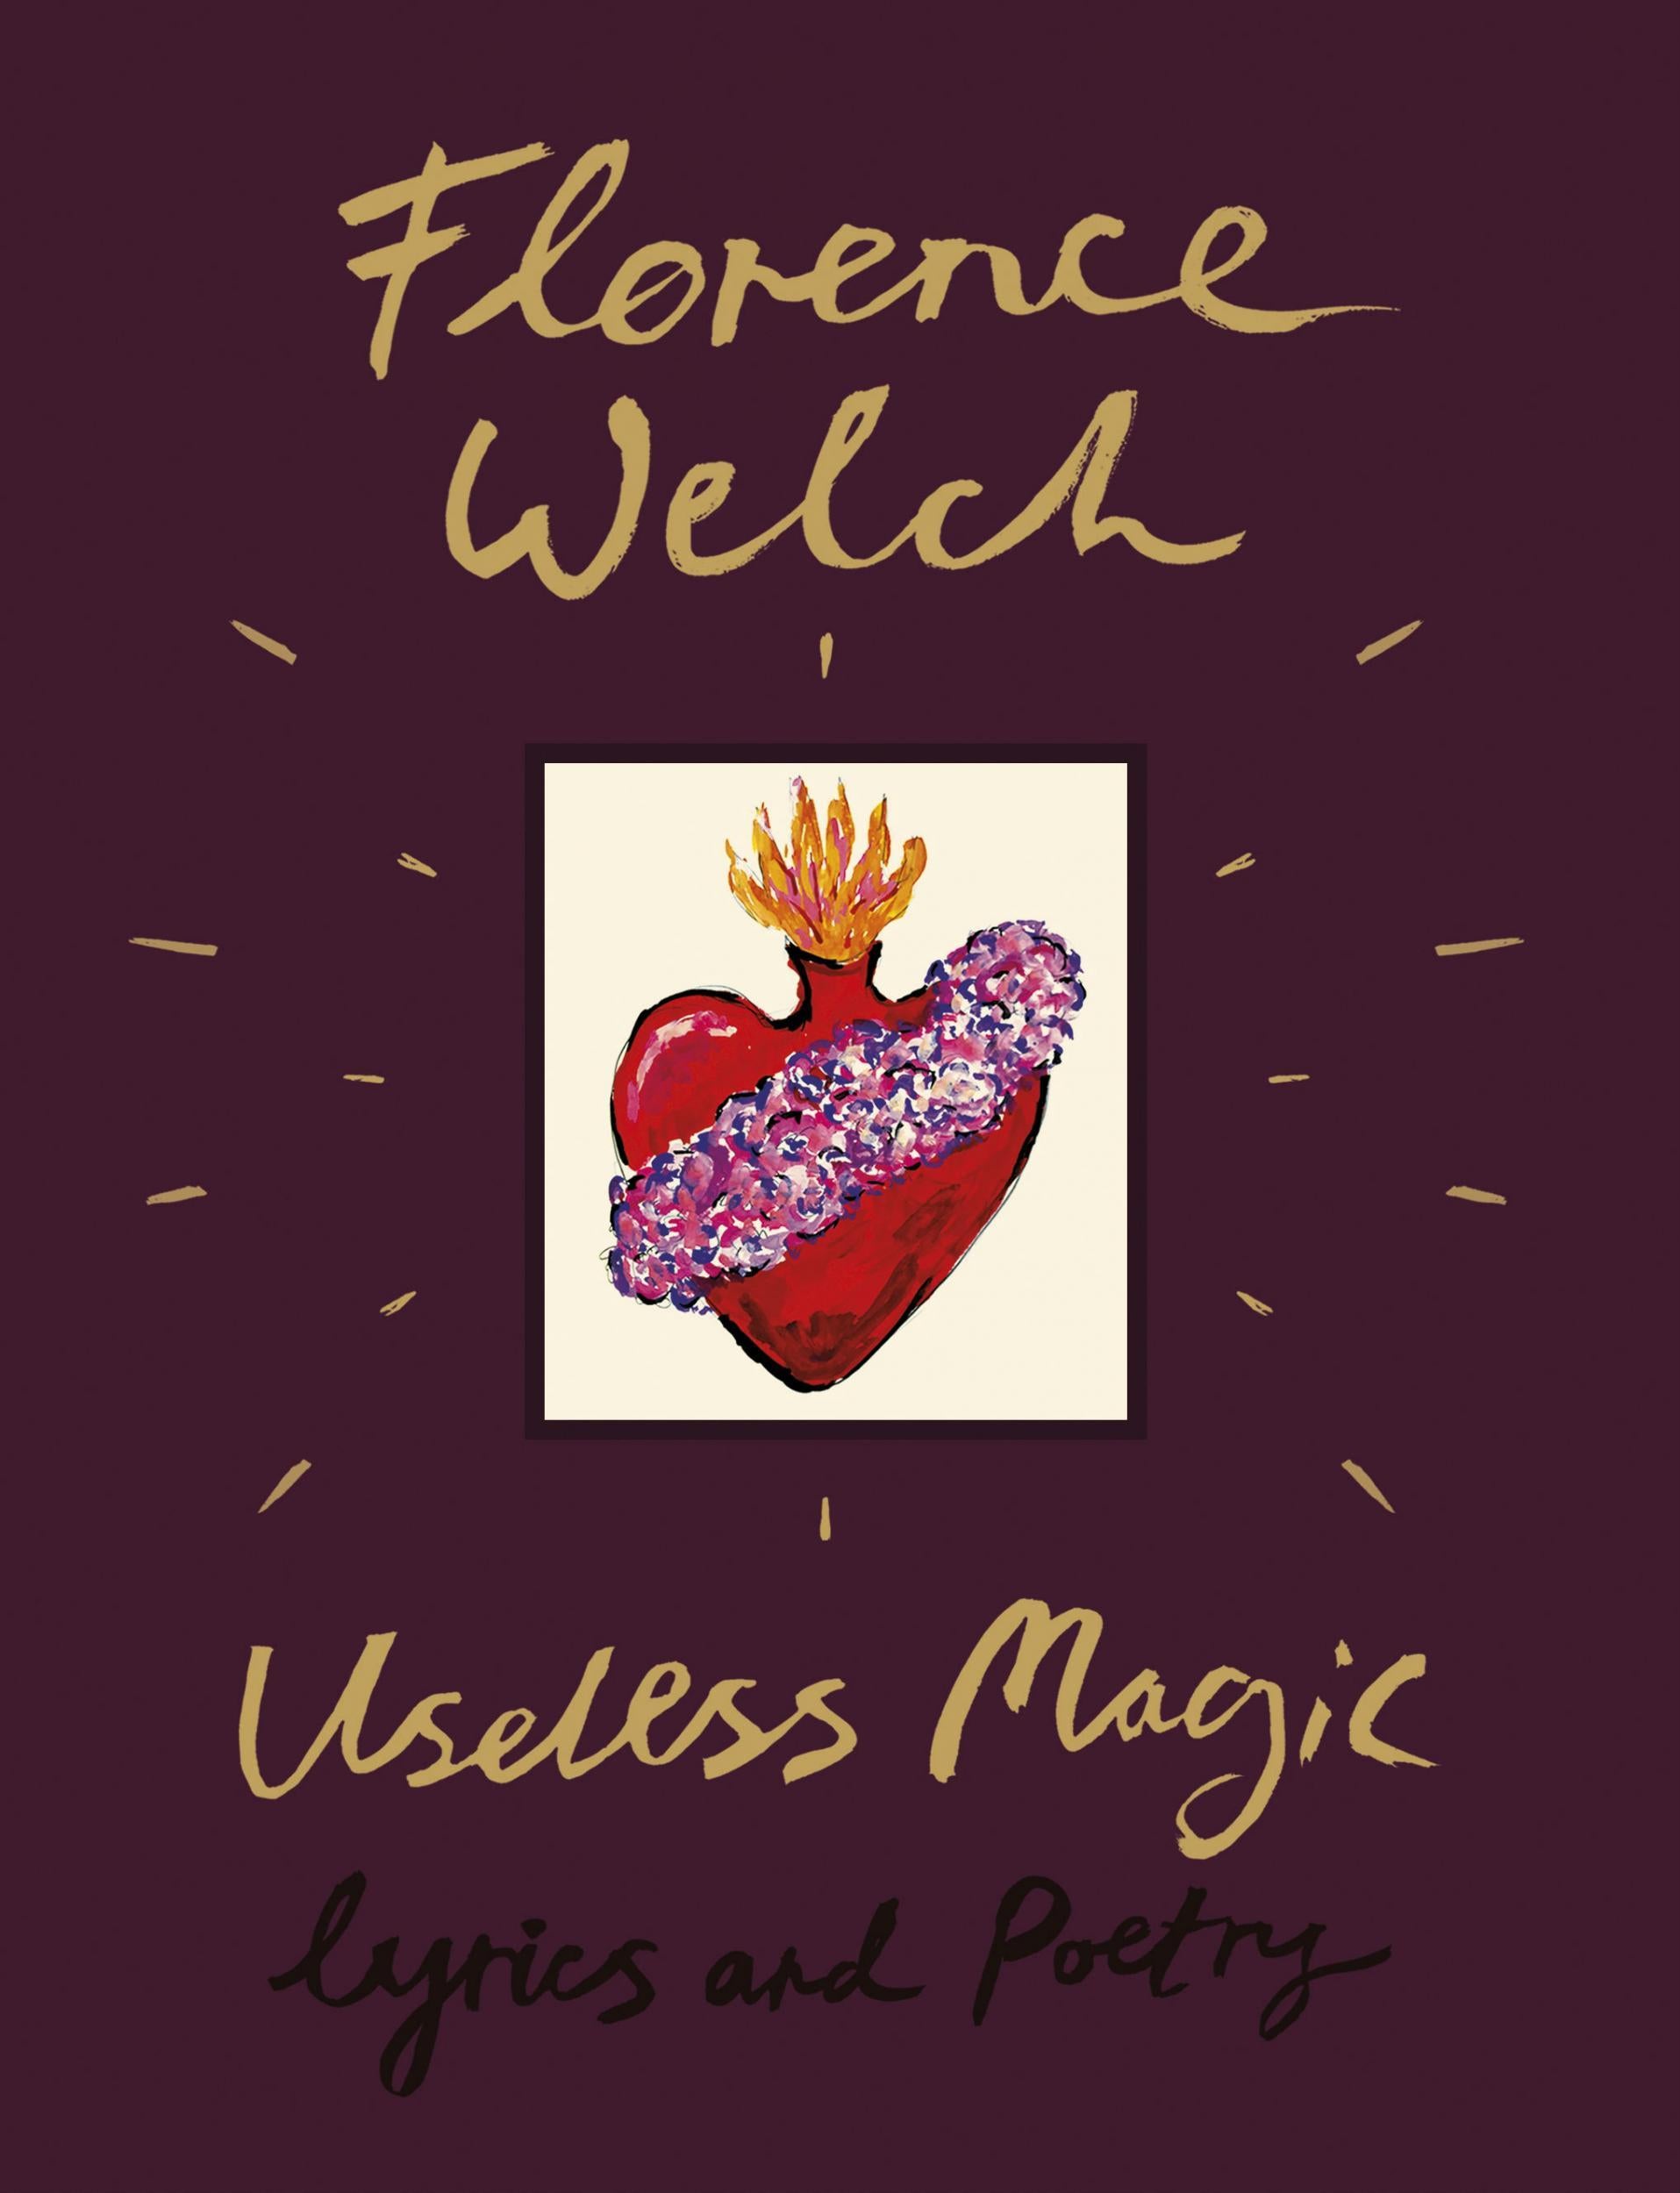 Welch is bringing out her debut book featuring poems, artwork and lyrics in July